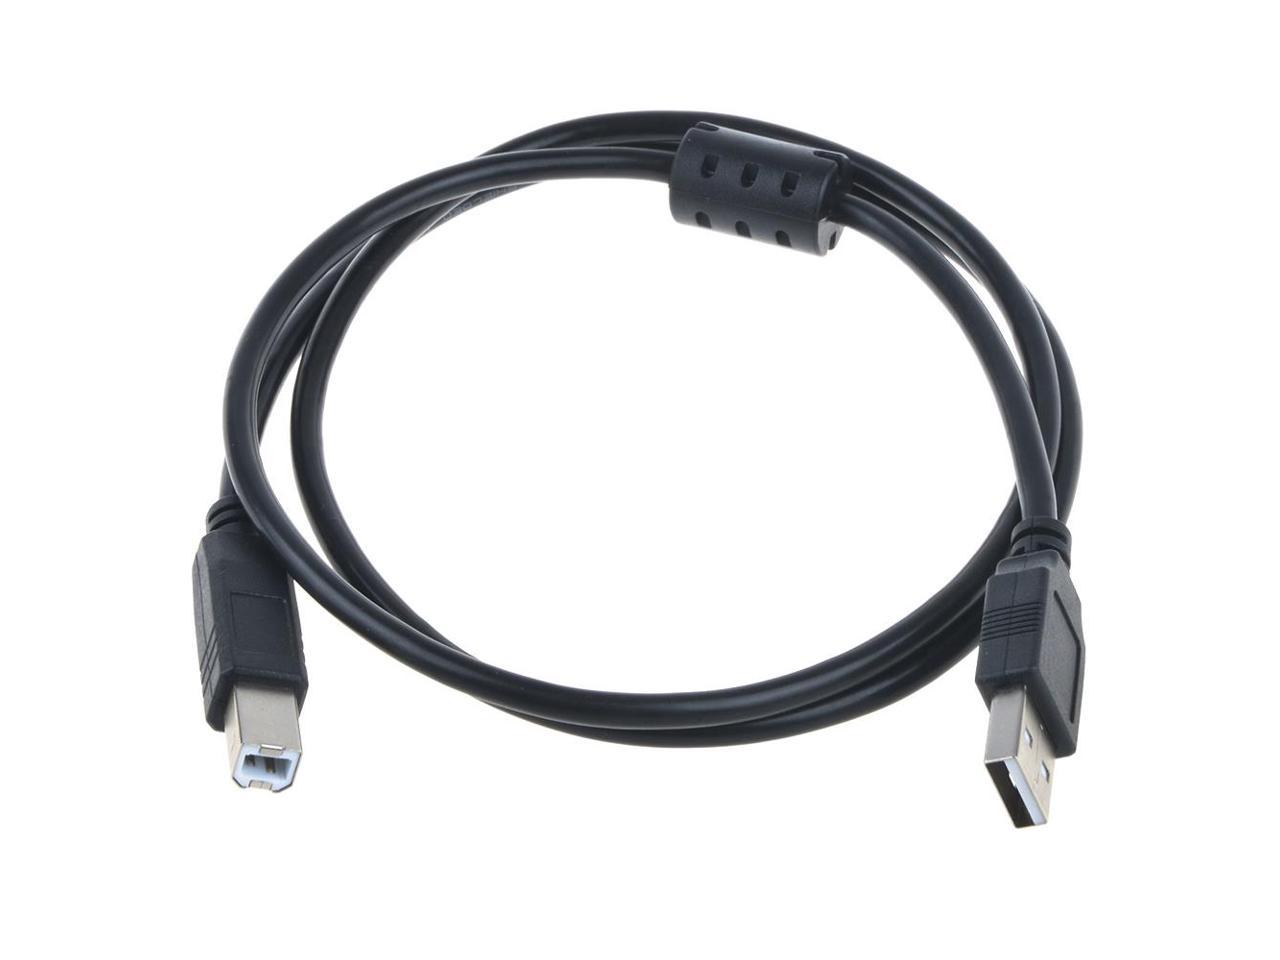 USB Data Cable Lead Cord for HP OfficeJet & PSC Series All-In-One Inkjet Printer 